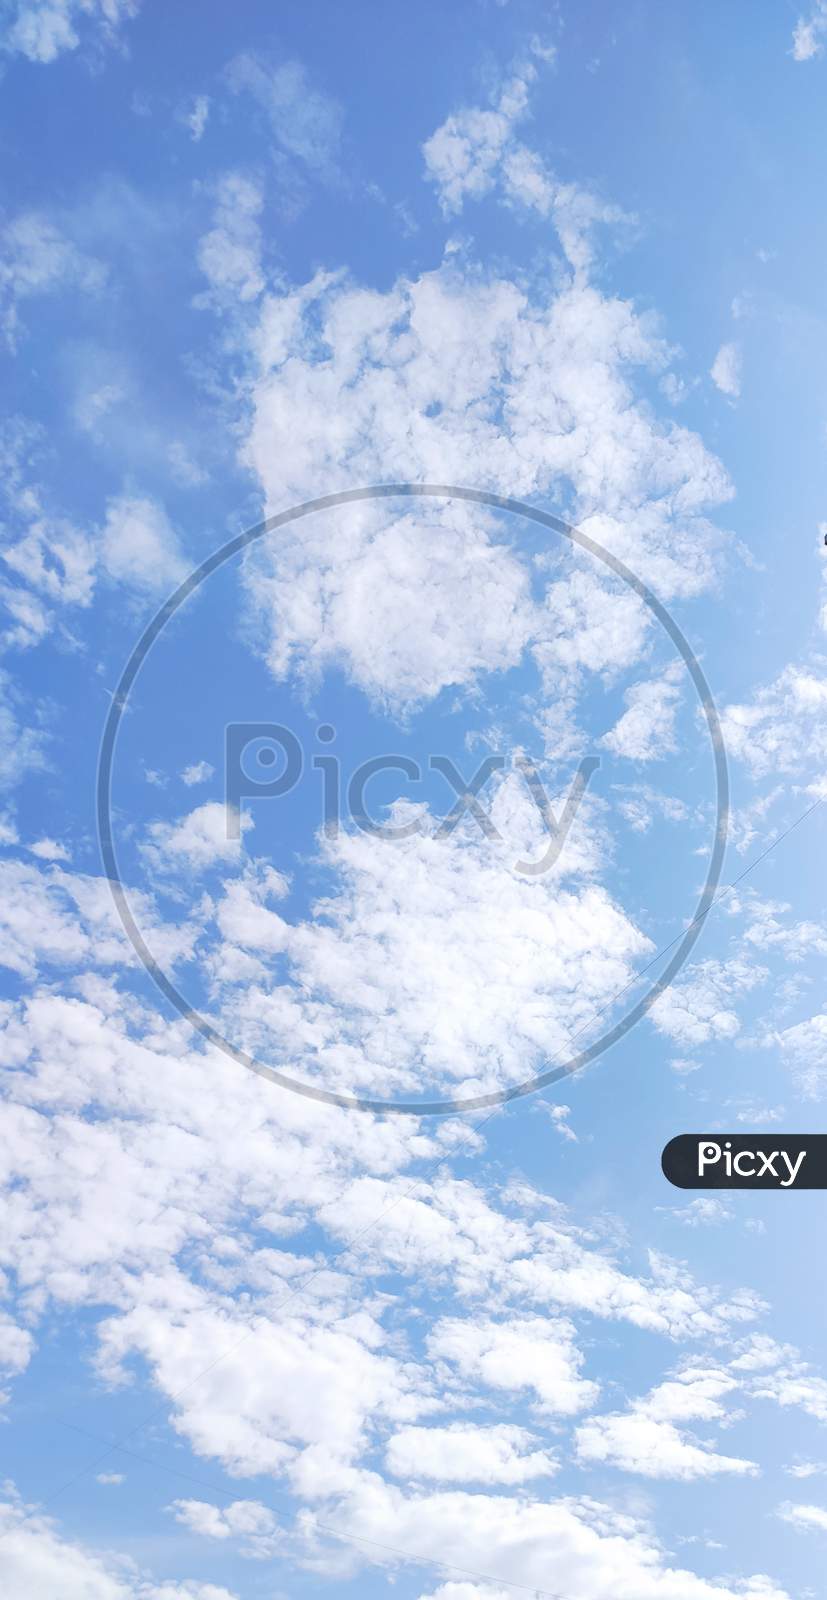 Sky Texture, Abstract Nature Blue Sky Background With Tiny Clouds. Panorama Image